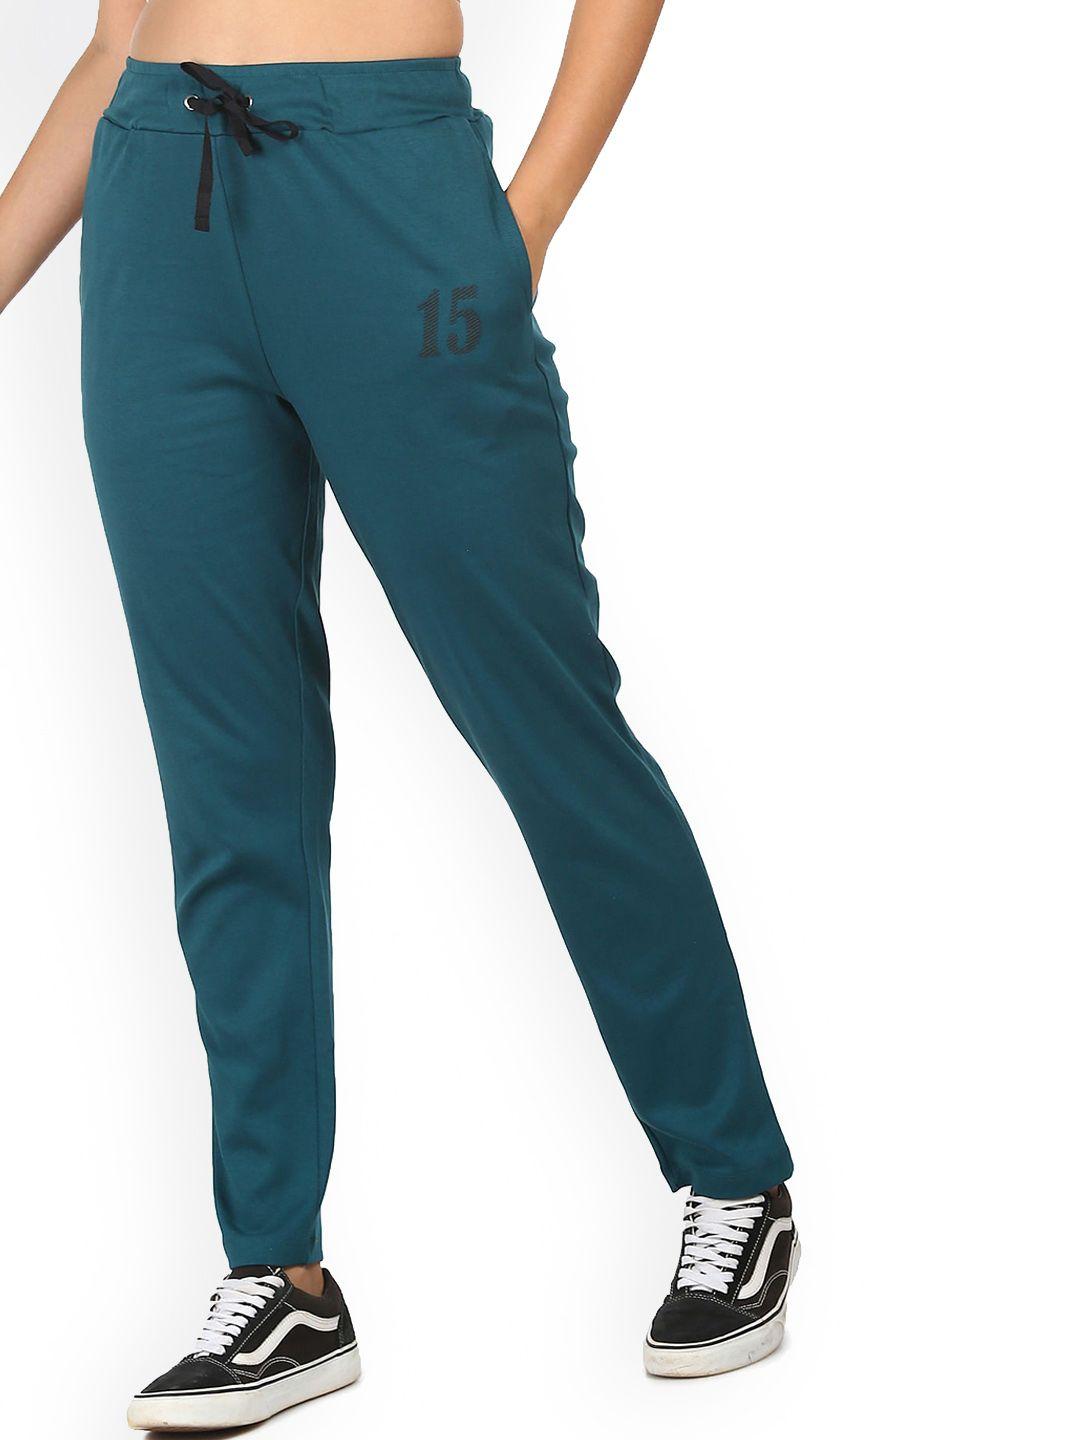 sugr women teal blue solid cotton track pants